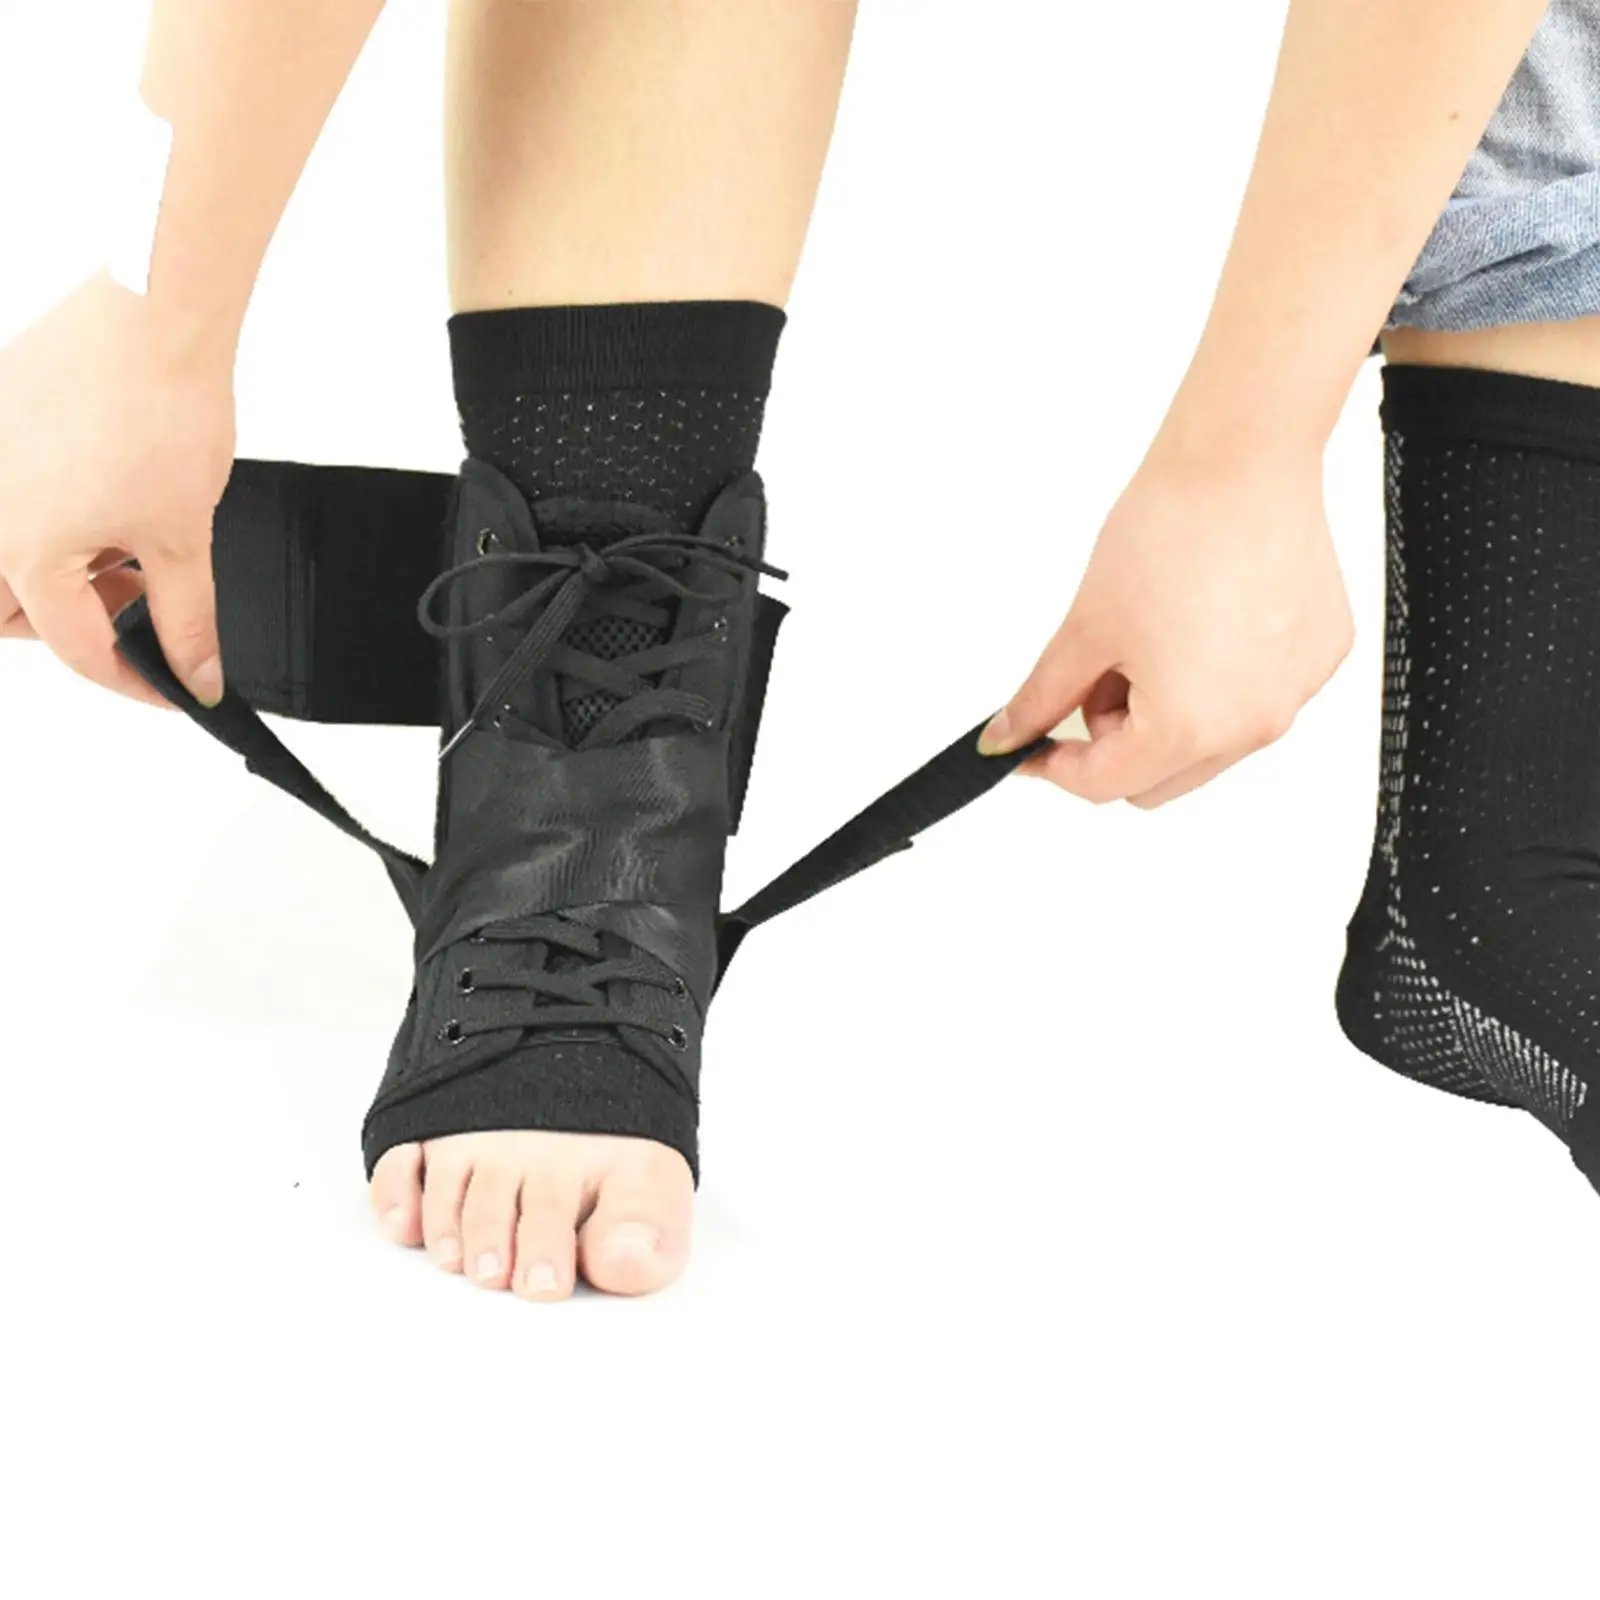 Ankle Brace Suppor Compression Socks Ankle Sprain Guard Adjustable Foot Protection for Football Cycling Tennis Gym Basketball